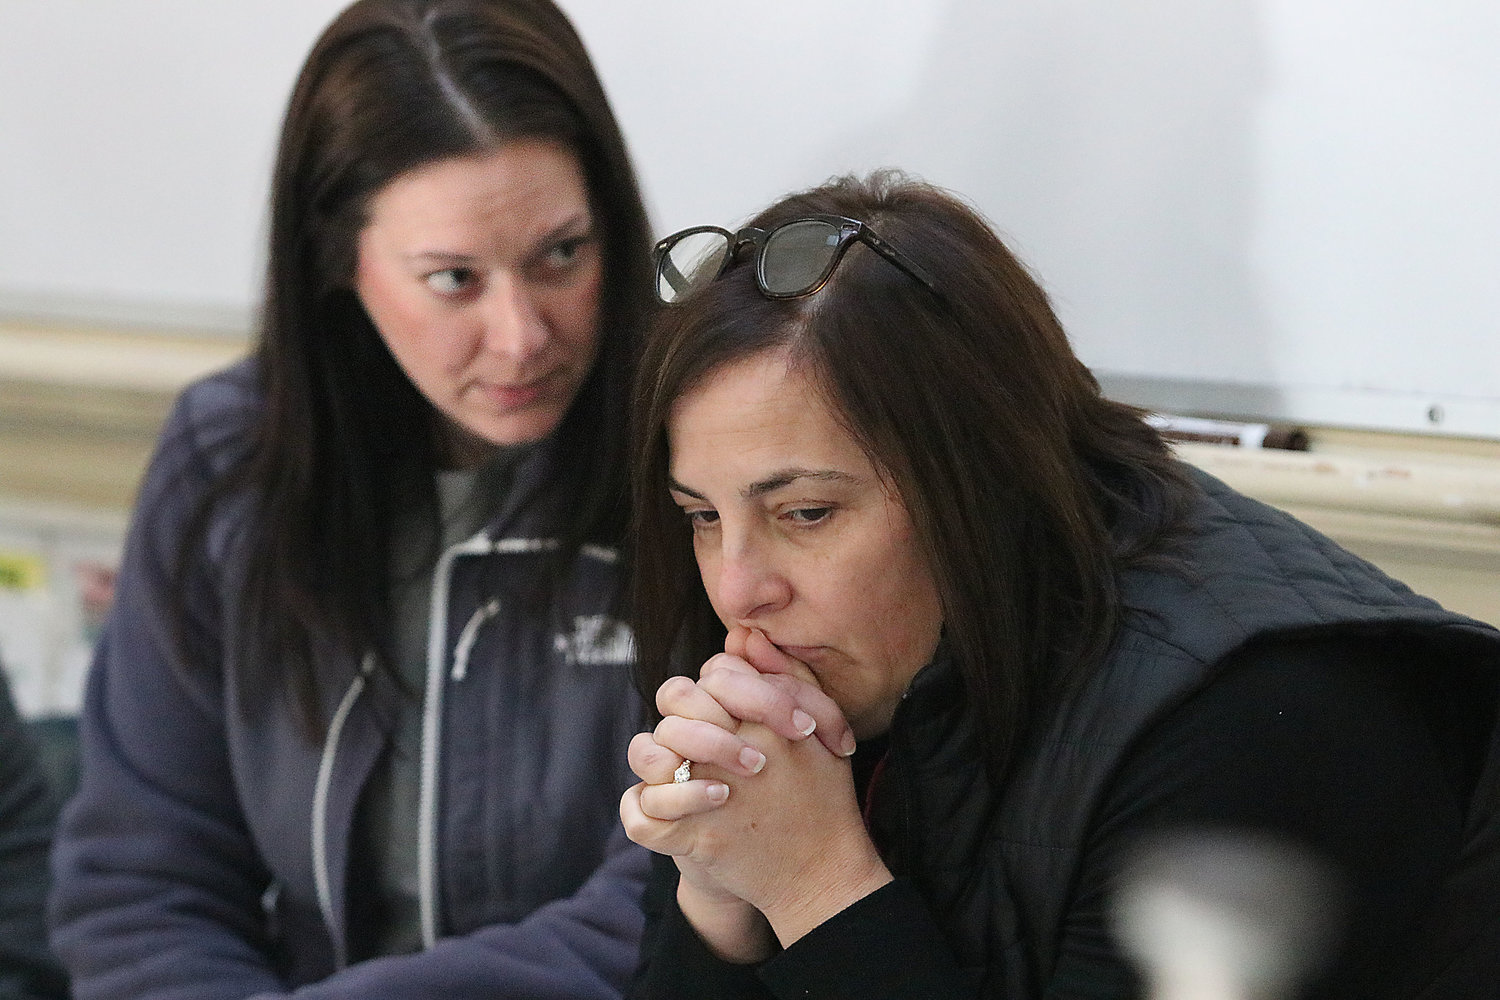 Colt Andrews fourth-grade teachers Jennifer Cotoia (left) and Lori Albuquerque nervously wait and listen for gun shots and banging on classroom doors as an active shooter roams the hallways during a training last Thursday.